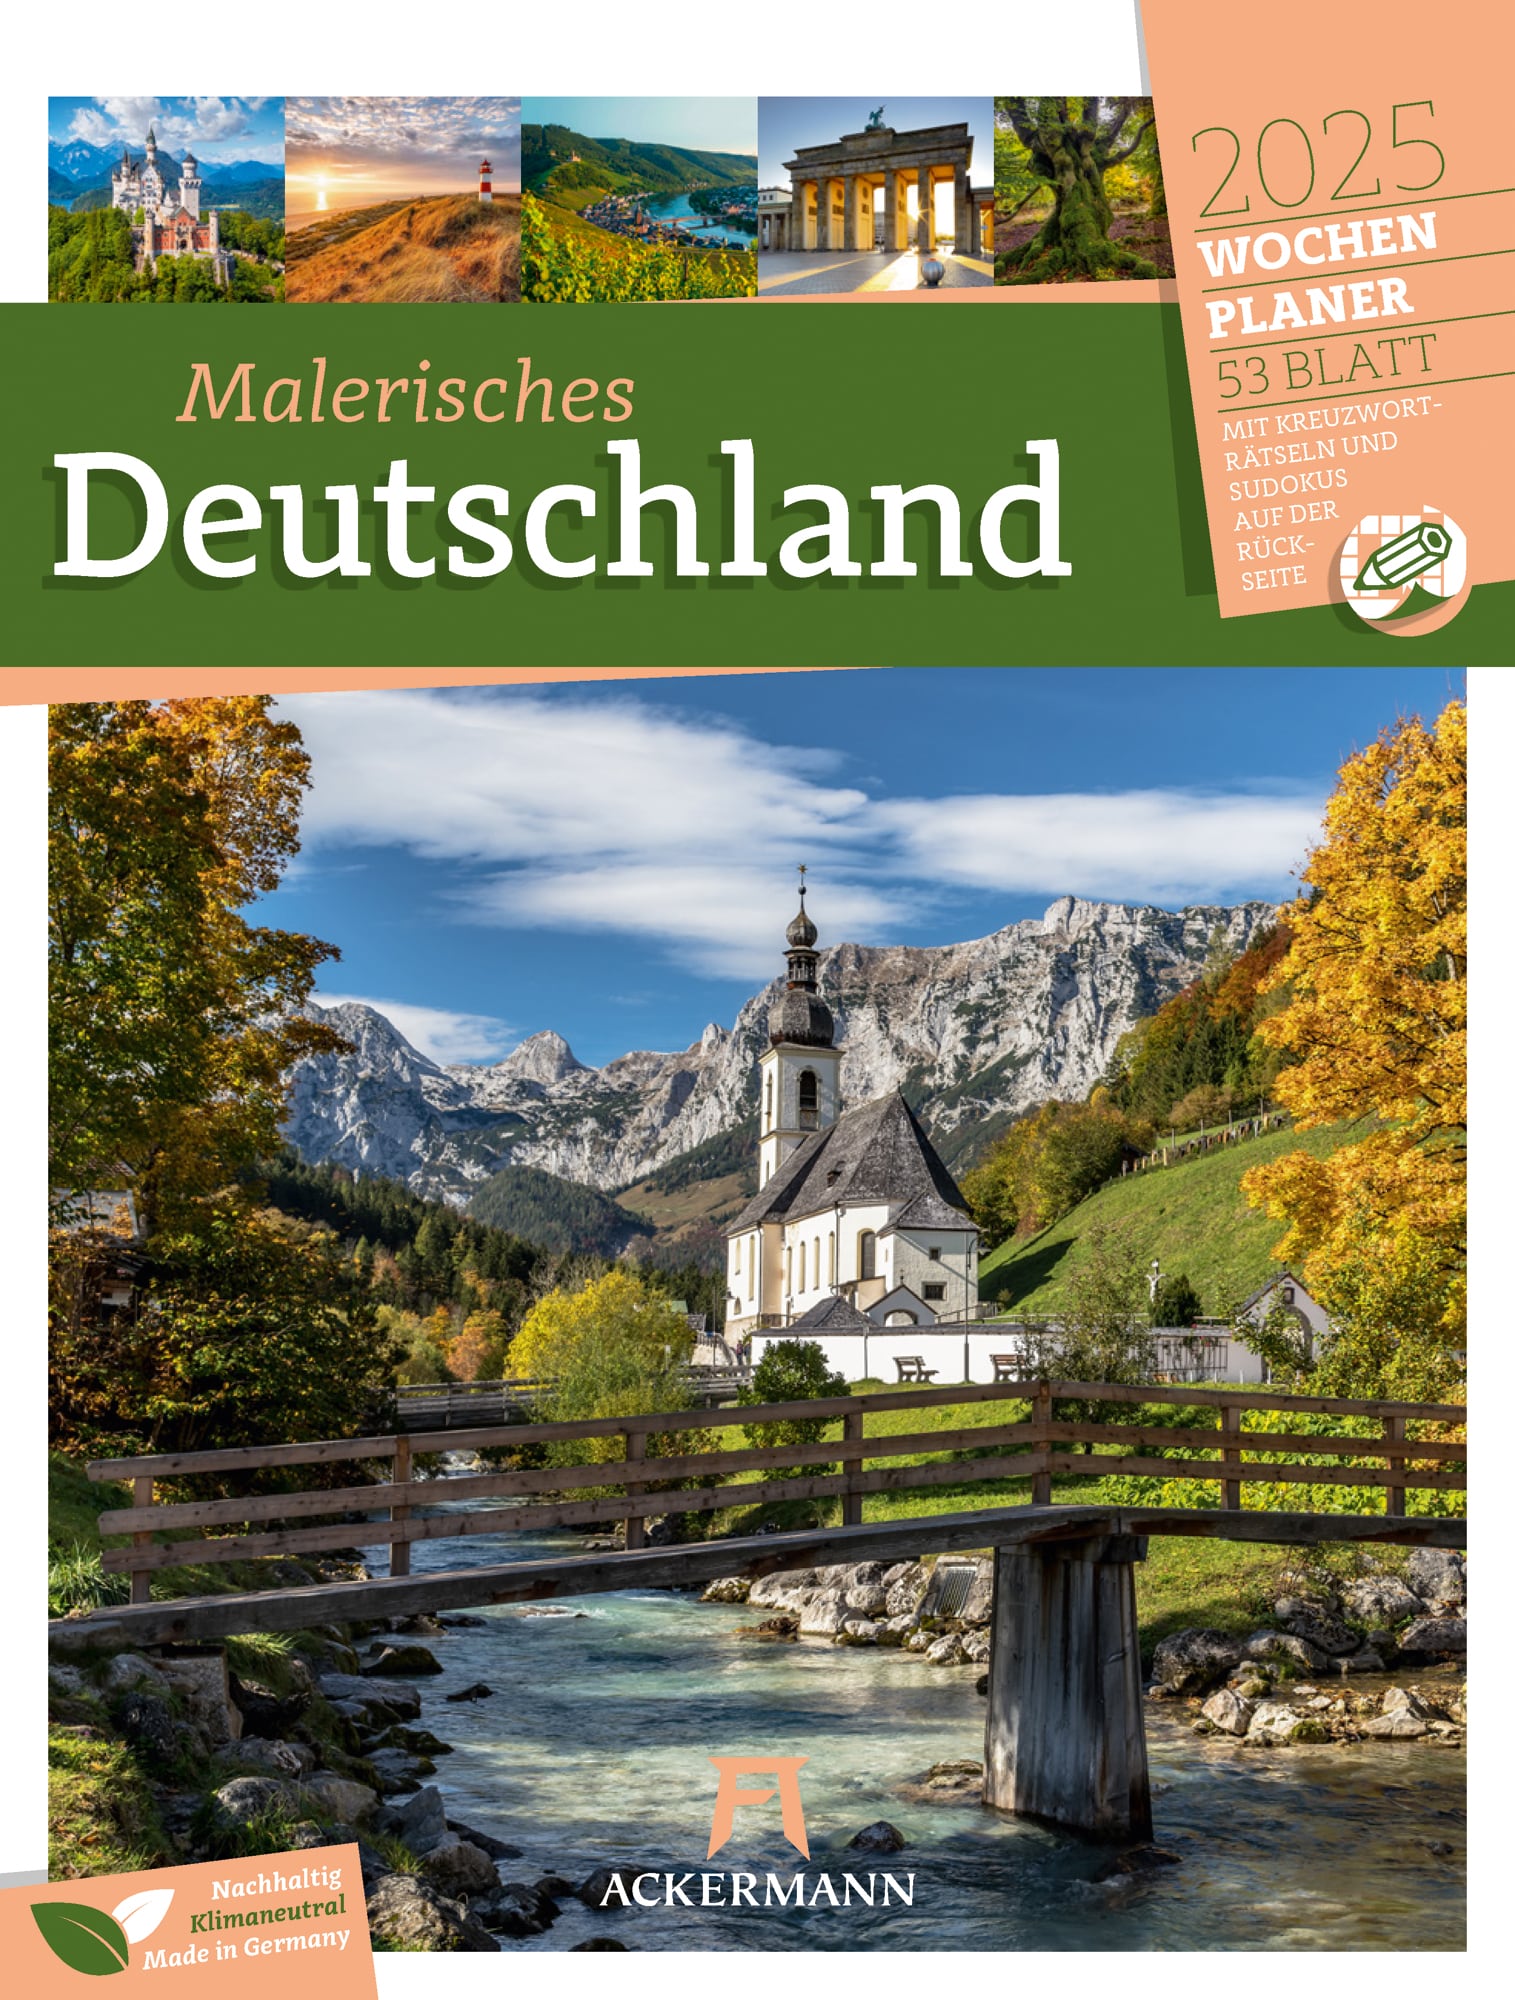 Ackermann Calendar Germany 2025 - Weekly Planner - Cover Page